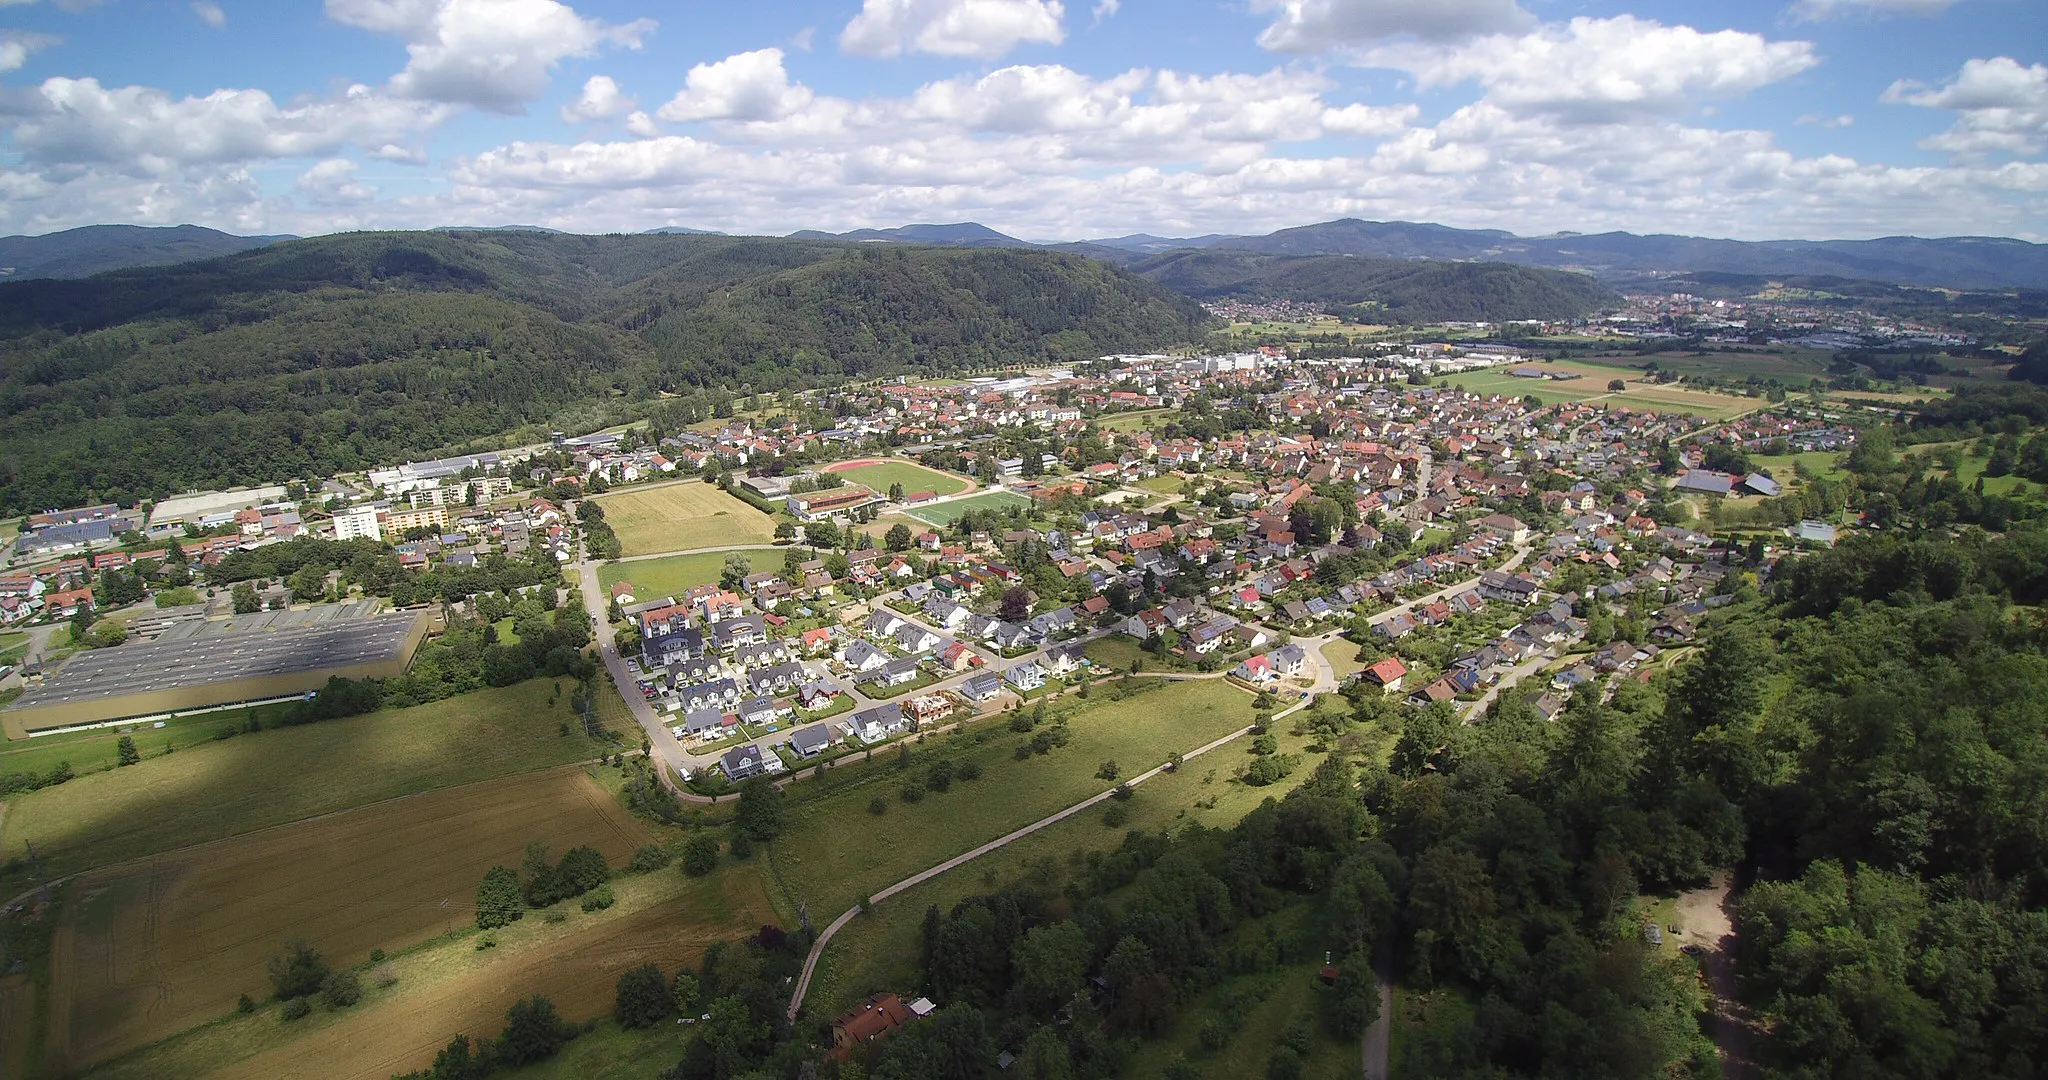 Photo showing: Aerial View of Maulburg, a town in southern Baden-Würrtemberg, Germany.